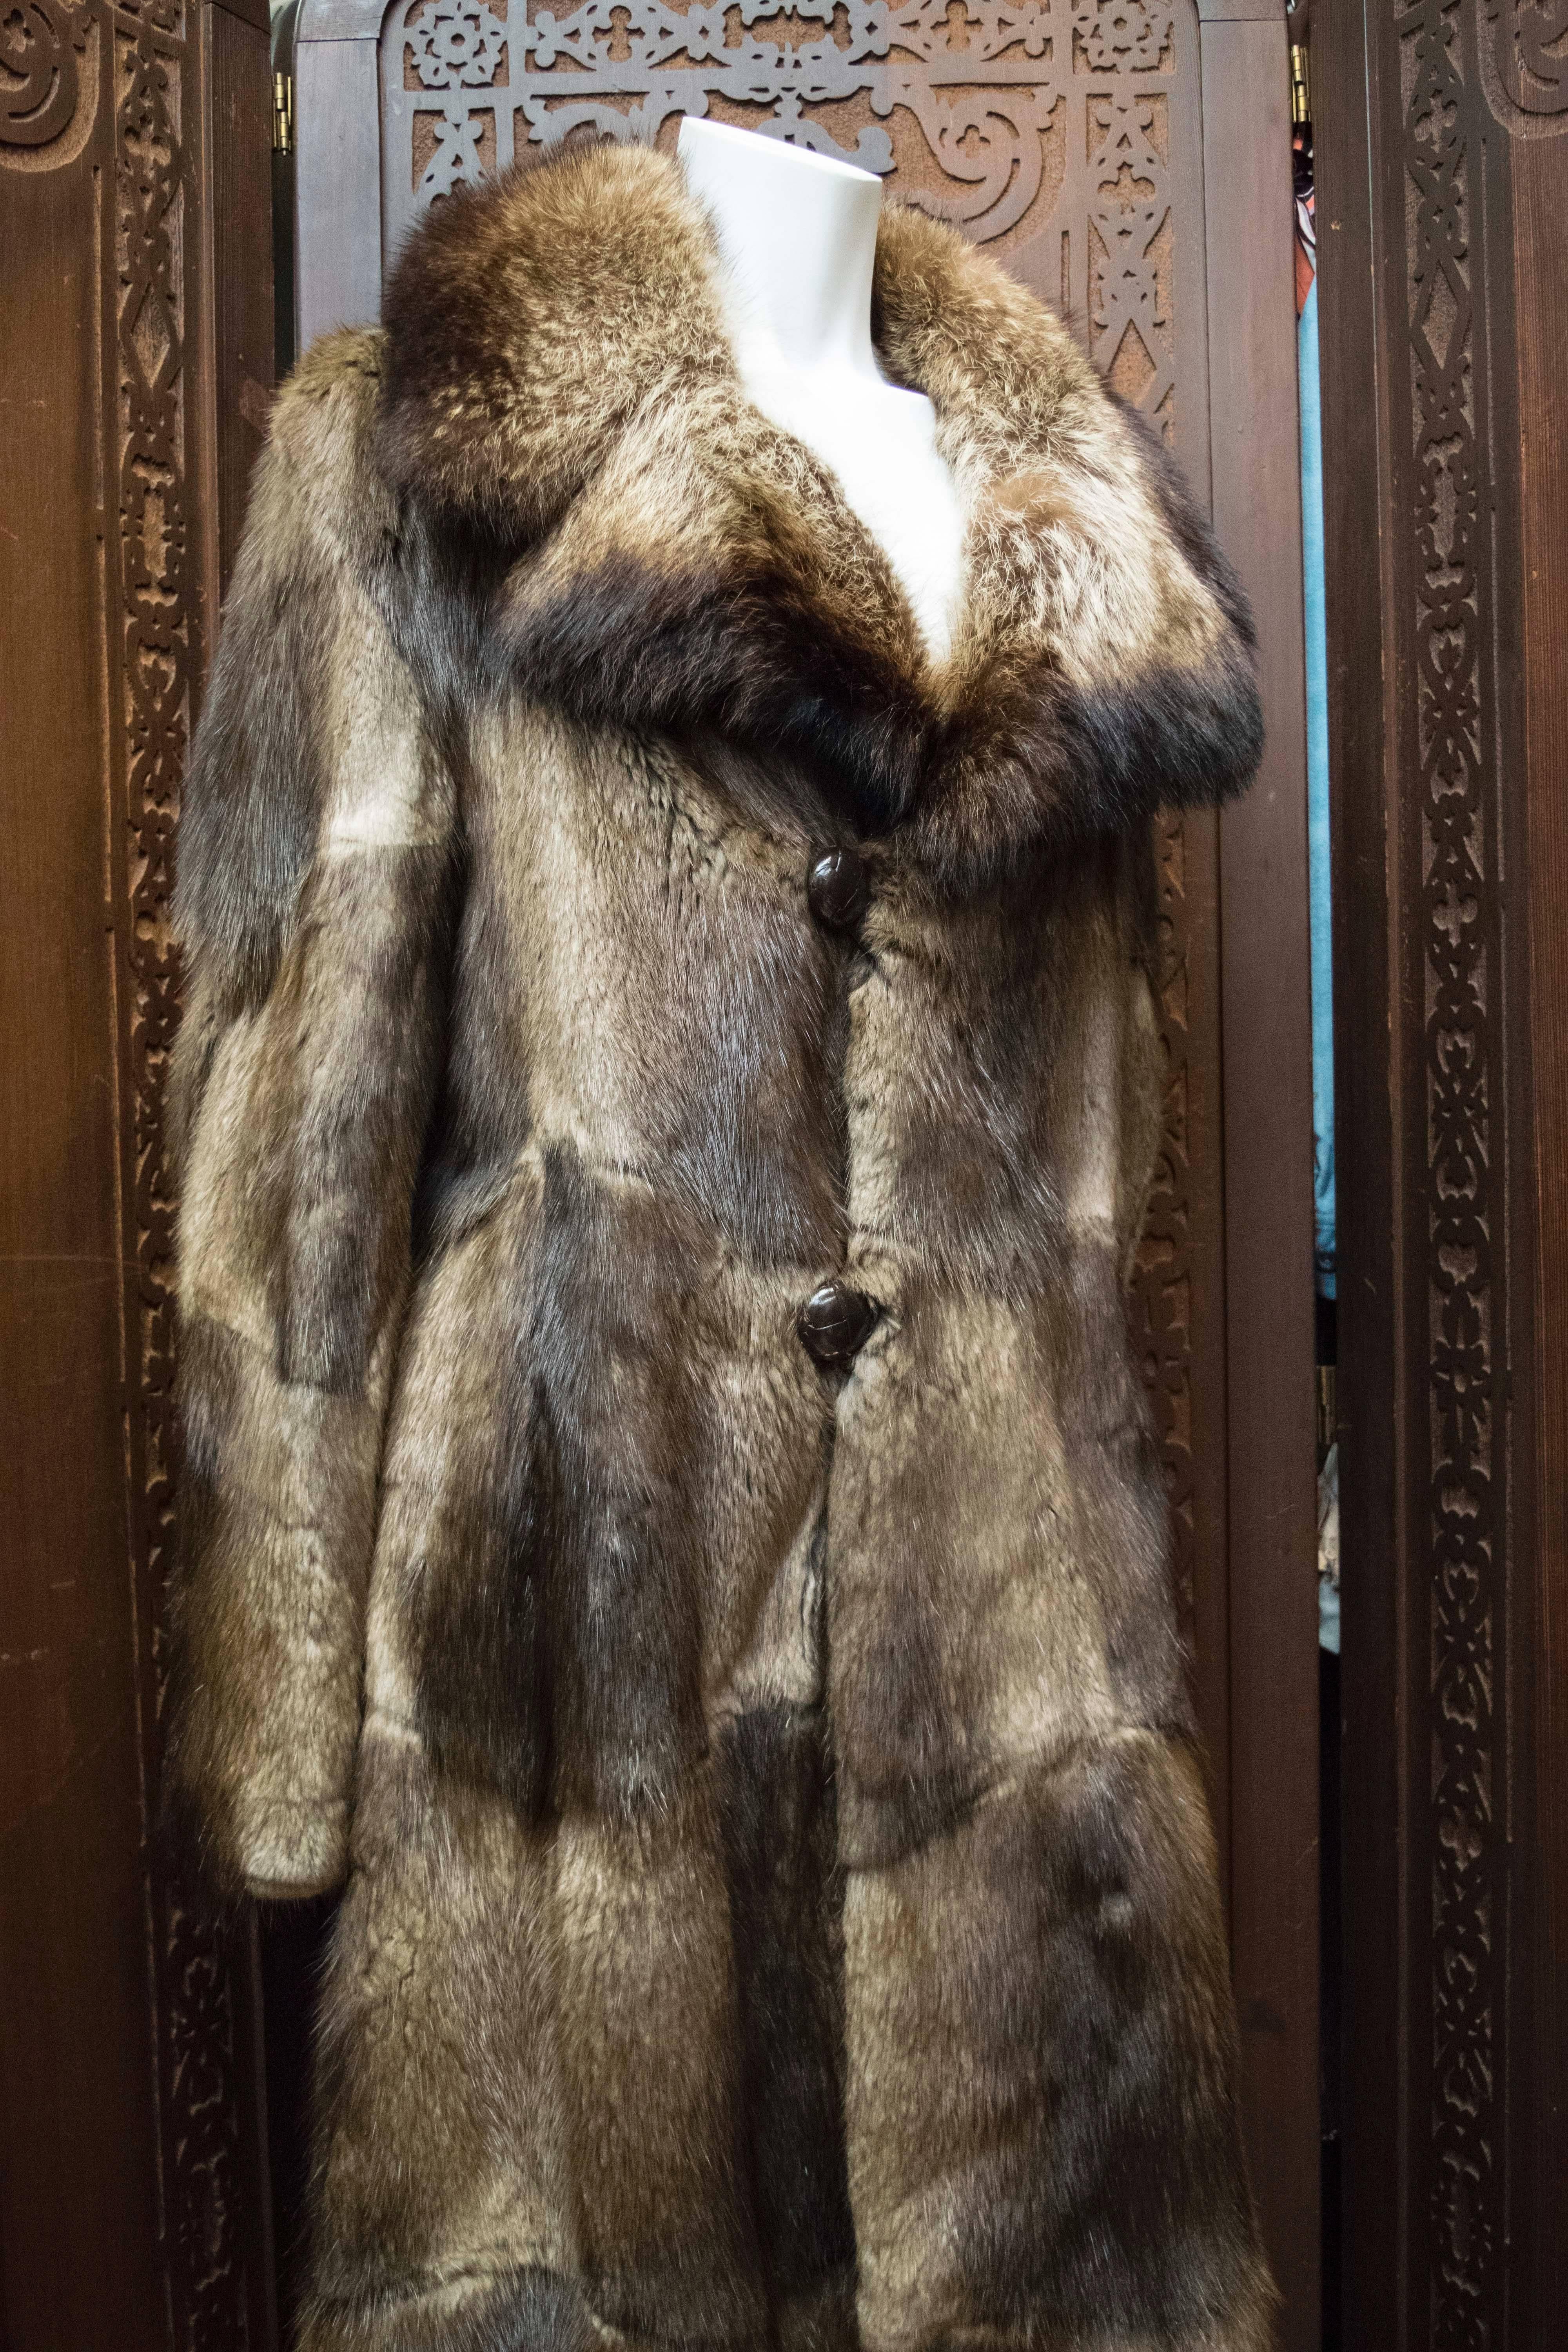 1970s Men's Muskrat and Racoon Fur Coat

A wonderful men's fur coat circa 1970 with opulent Racoon fur collar and soft, panelled Muskrat forming the main body of the coat.  

B 44
H 46
L 48